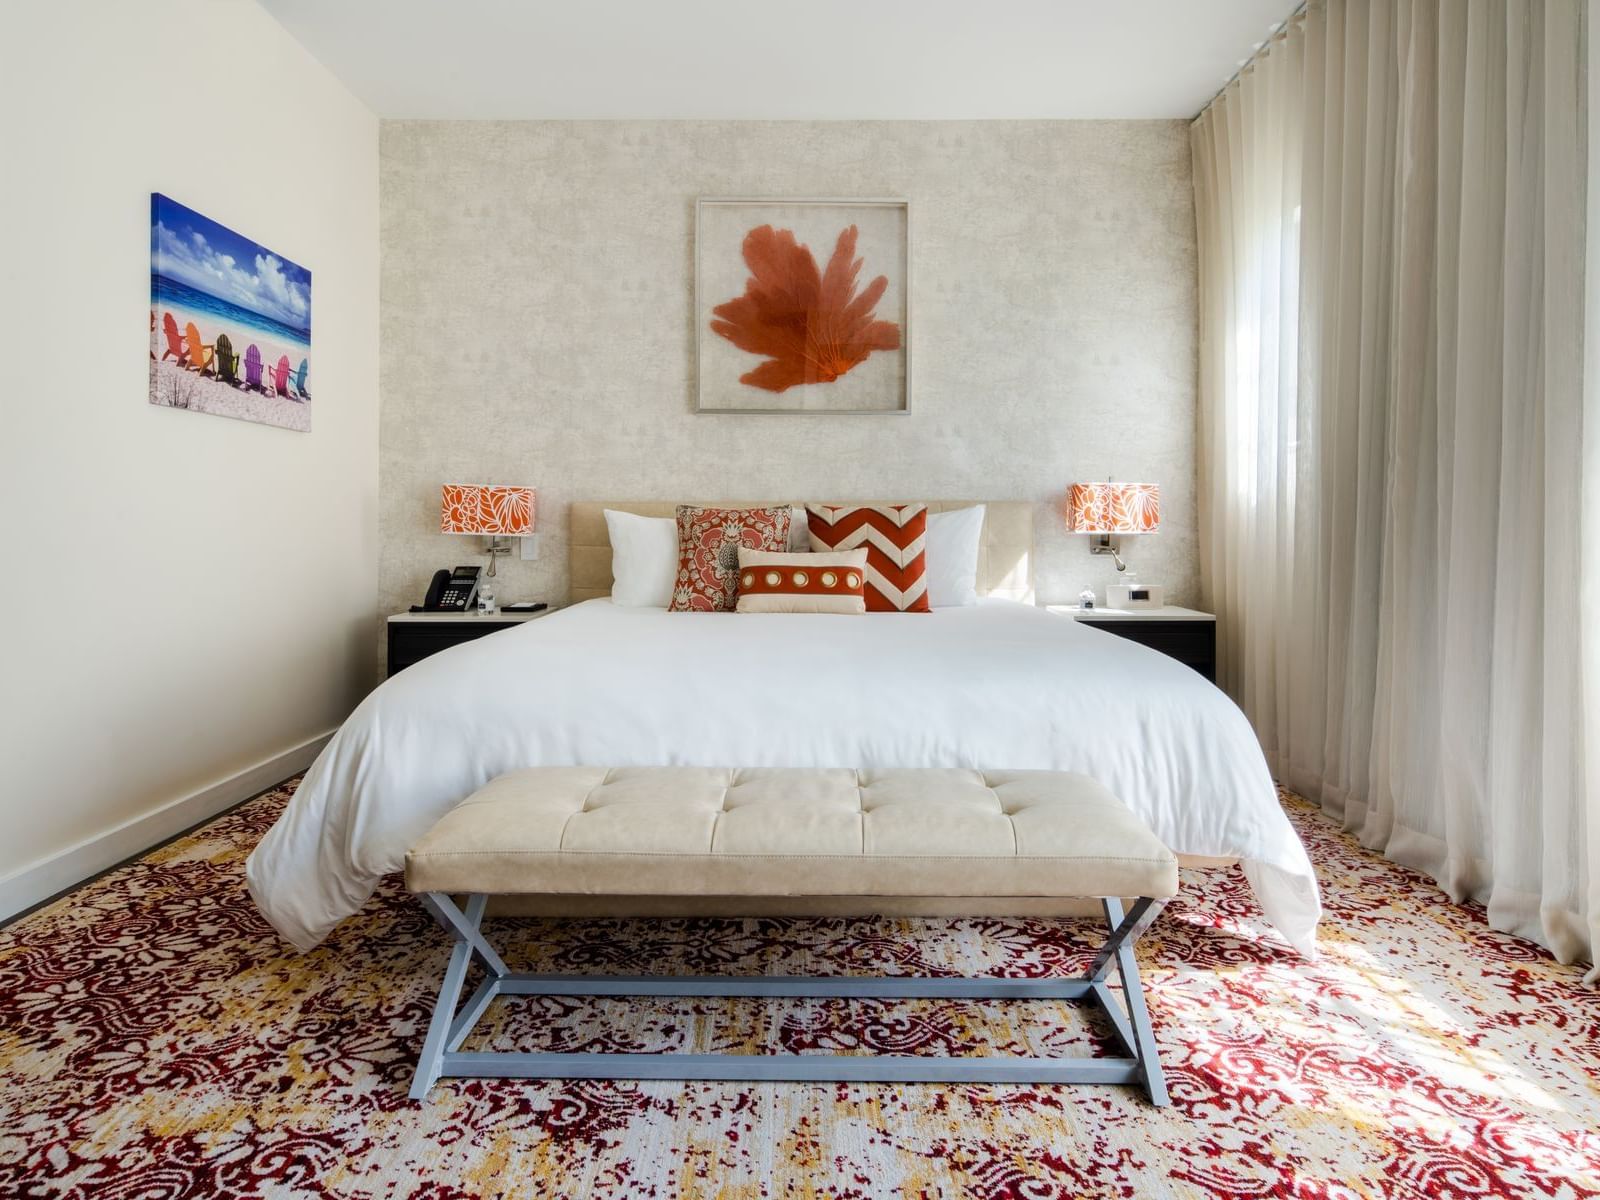 large bed in carpeted room with wall art